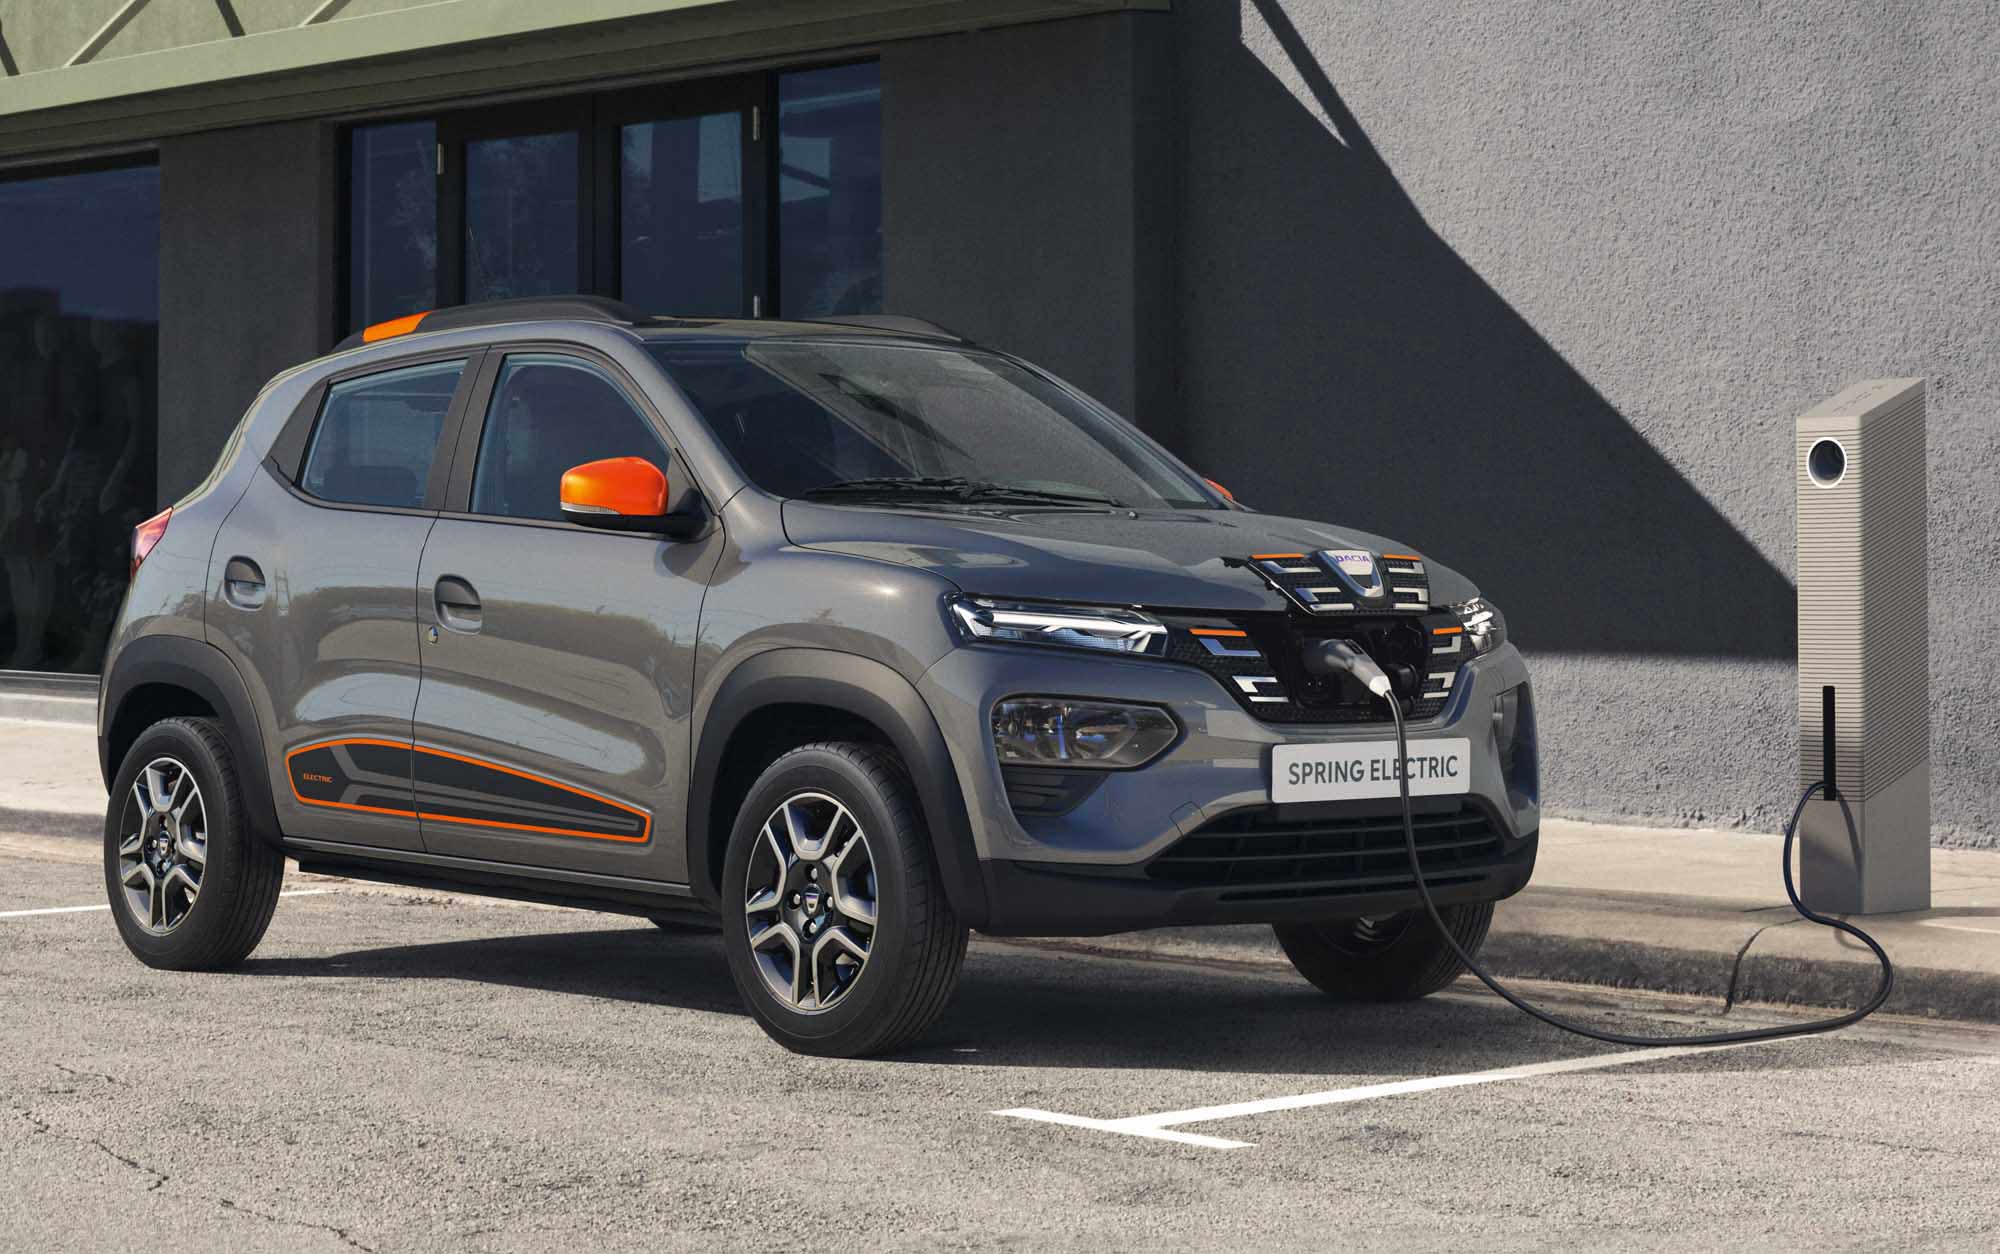 Dacia Spring makes electric mobility even more accessible - Renault Group